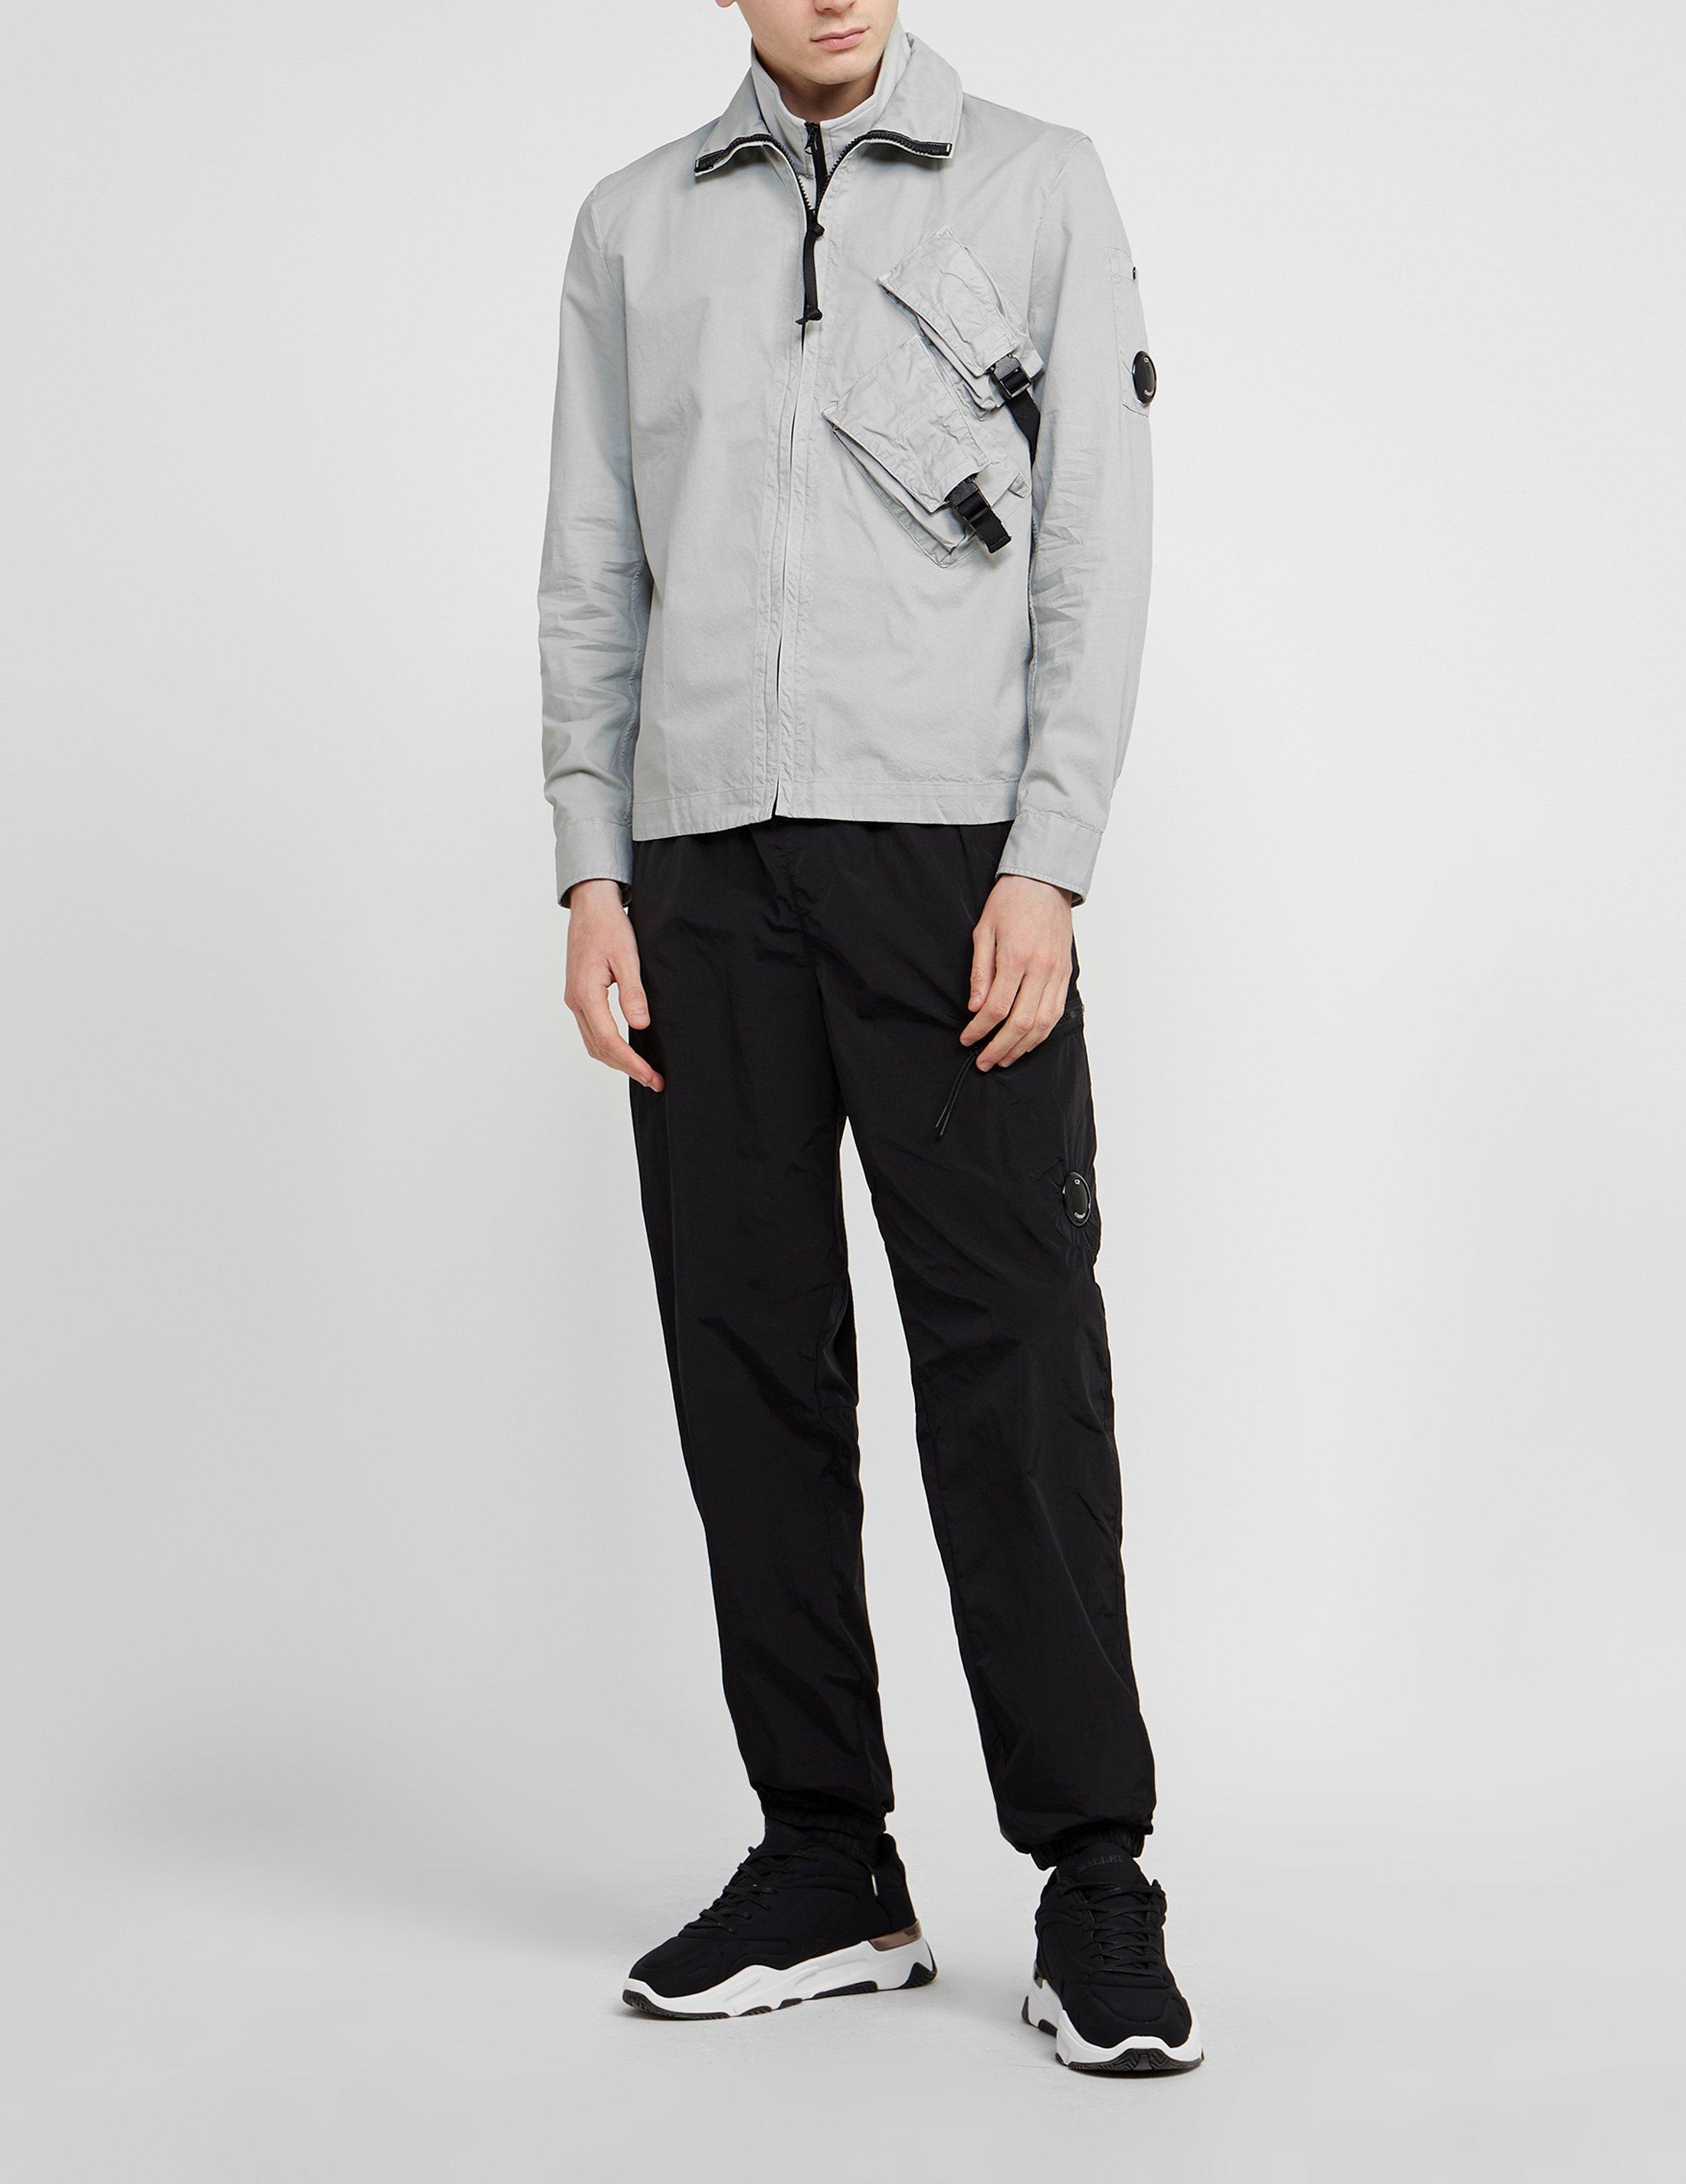 C.P. Company Clip 2 Pocket Overshirt Grey in Gray for Men | Lyst